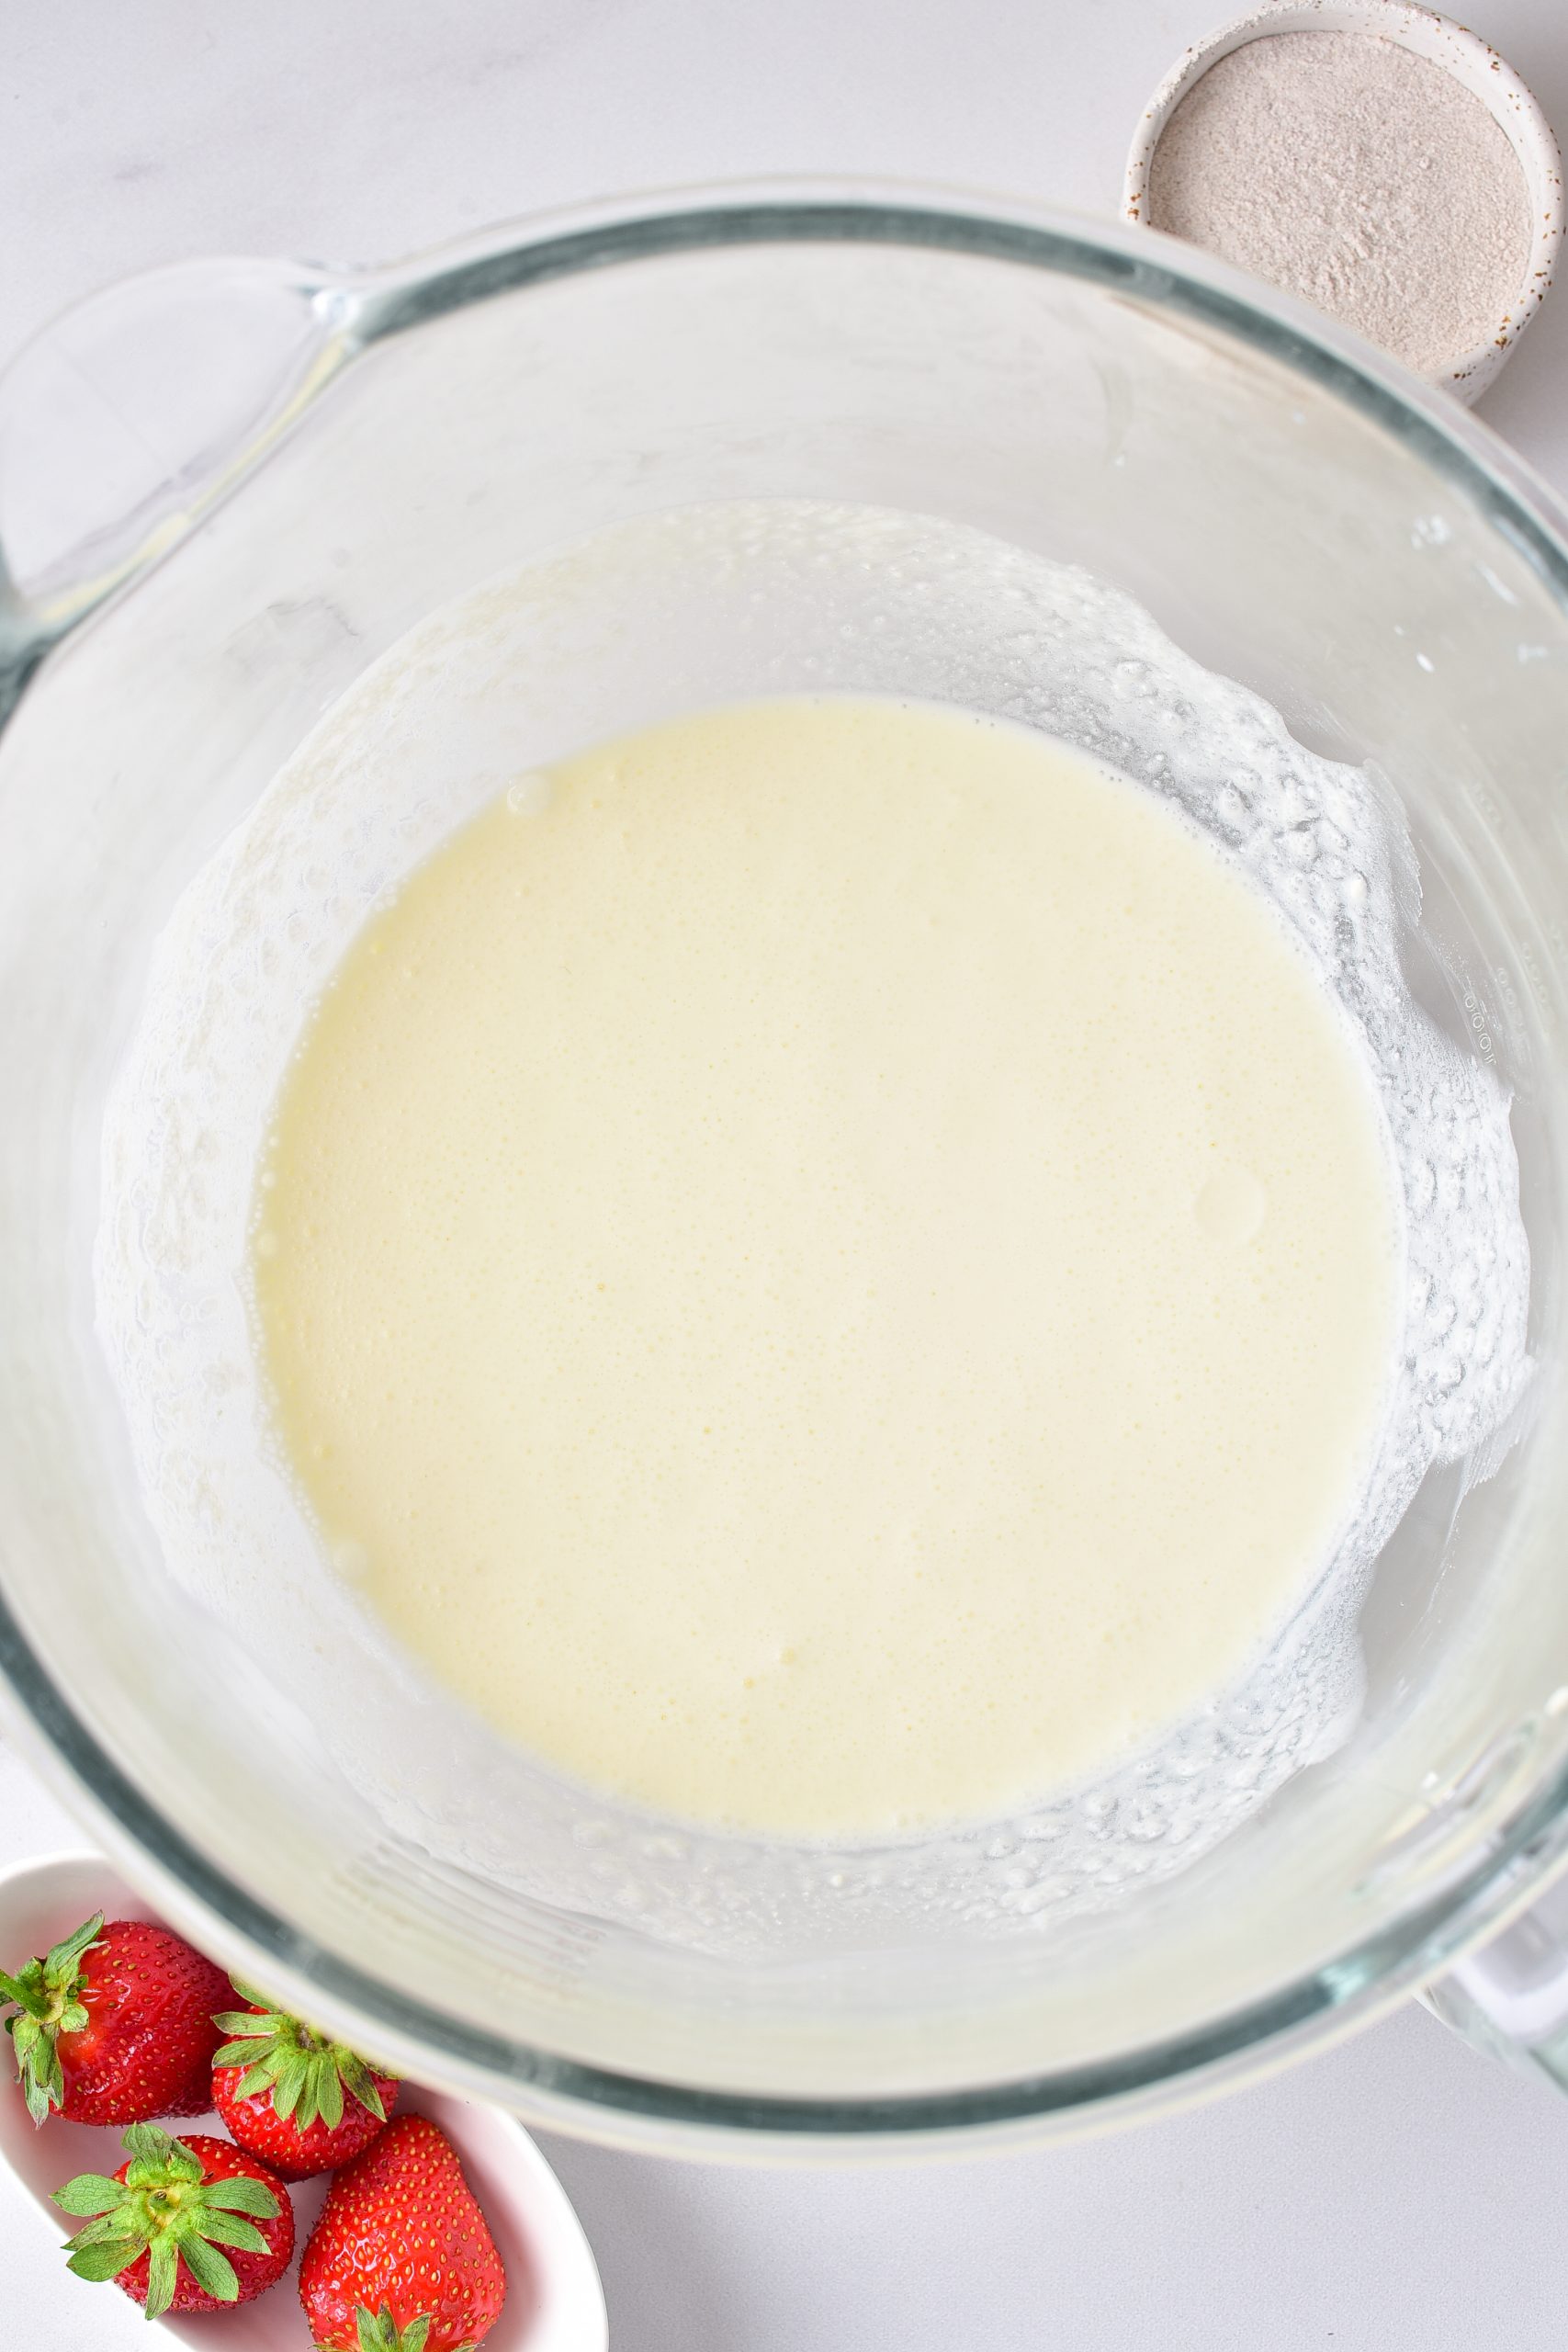 In a mixing bowl, blend together the cream cheese until fluffy. 